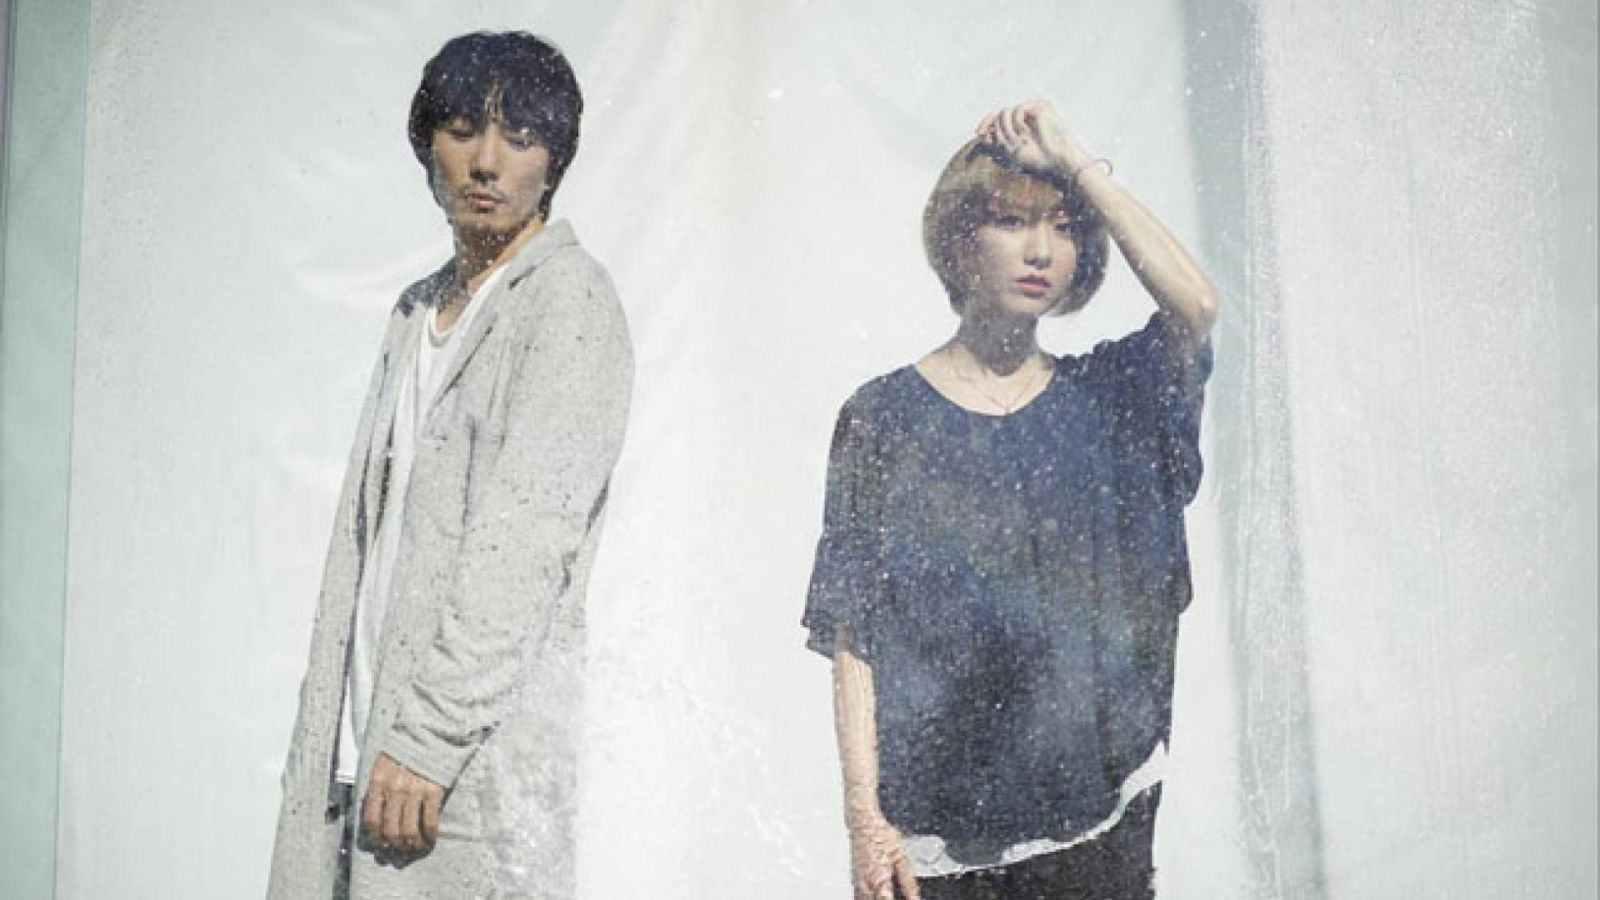 New Album from moumoon © 2015 avex music creative Inc. Provided by JPU Records.